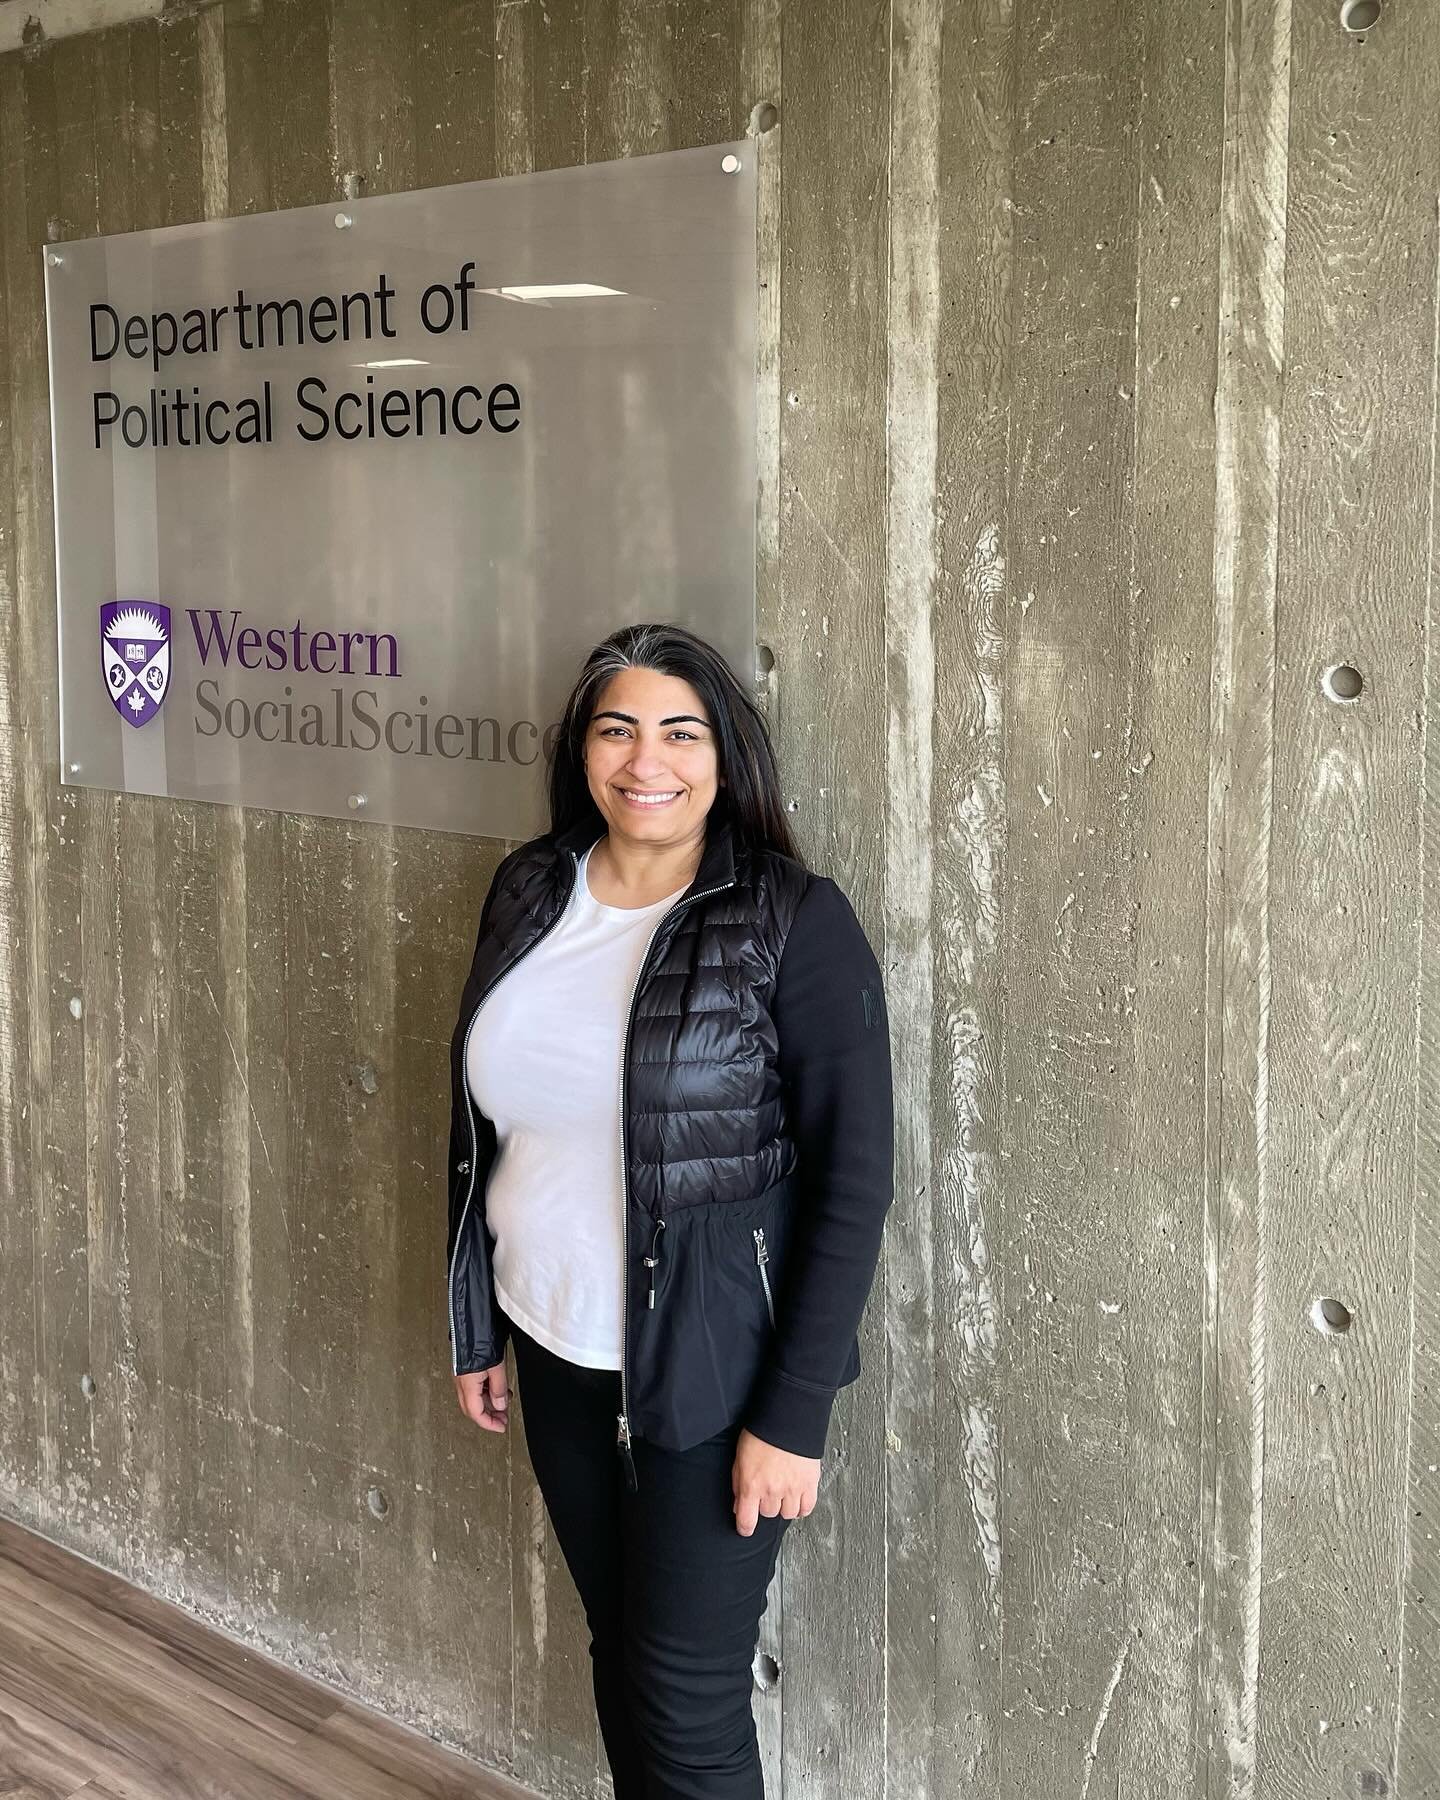 I am in day 2 of my Grad program at @westernuniversity here in The City of London. Learning loads, but definitely missing home. 
Also, huge kudos to Mayor Elizabeth Roy for hosting an outstanding women in leadership forum. The buzz about it is impres